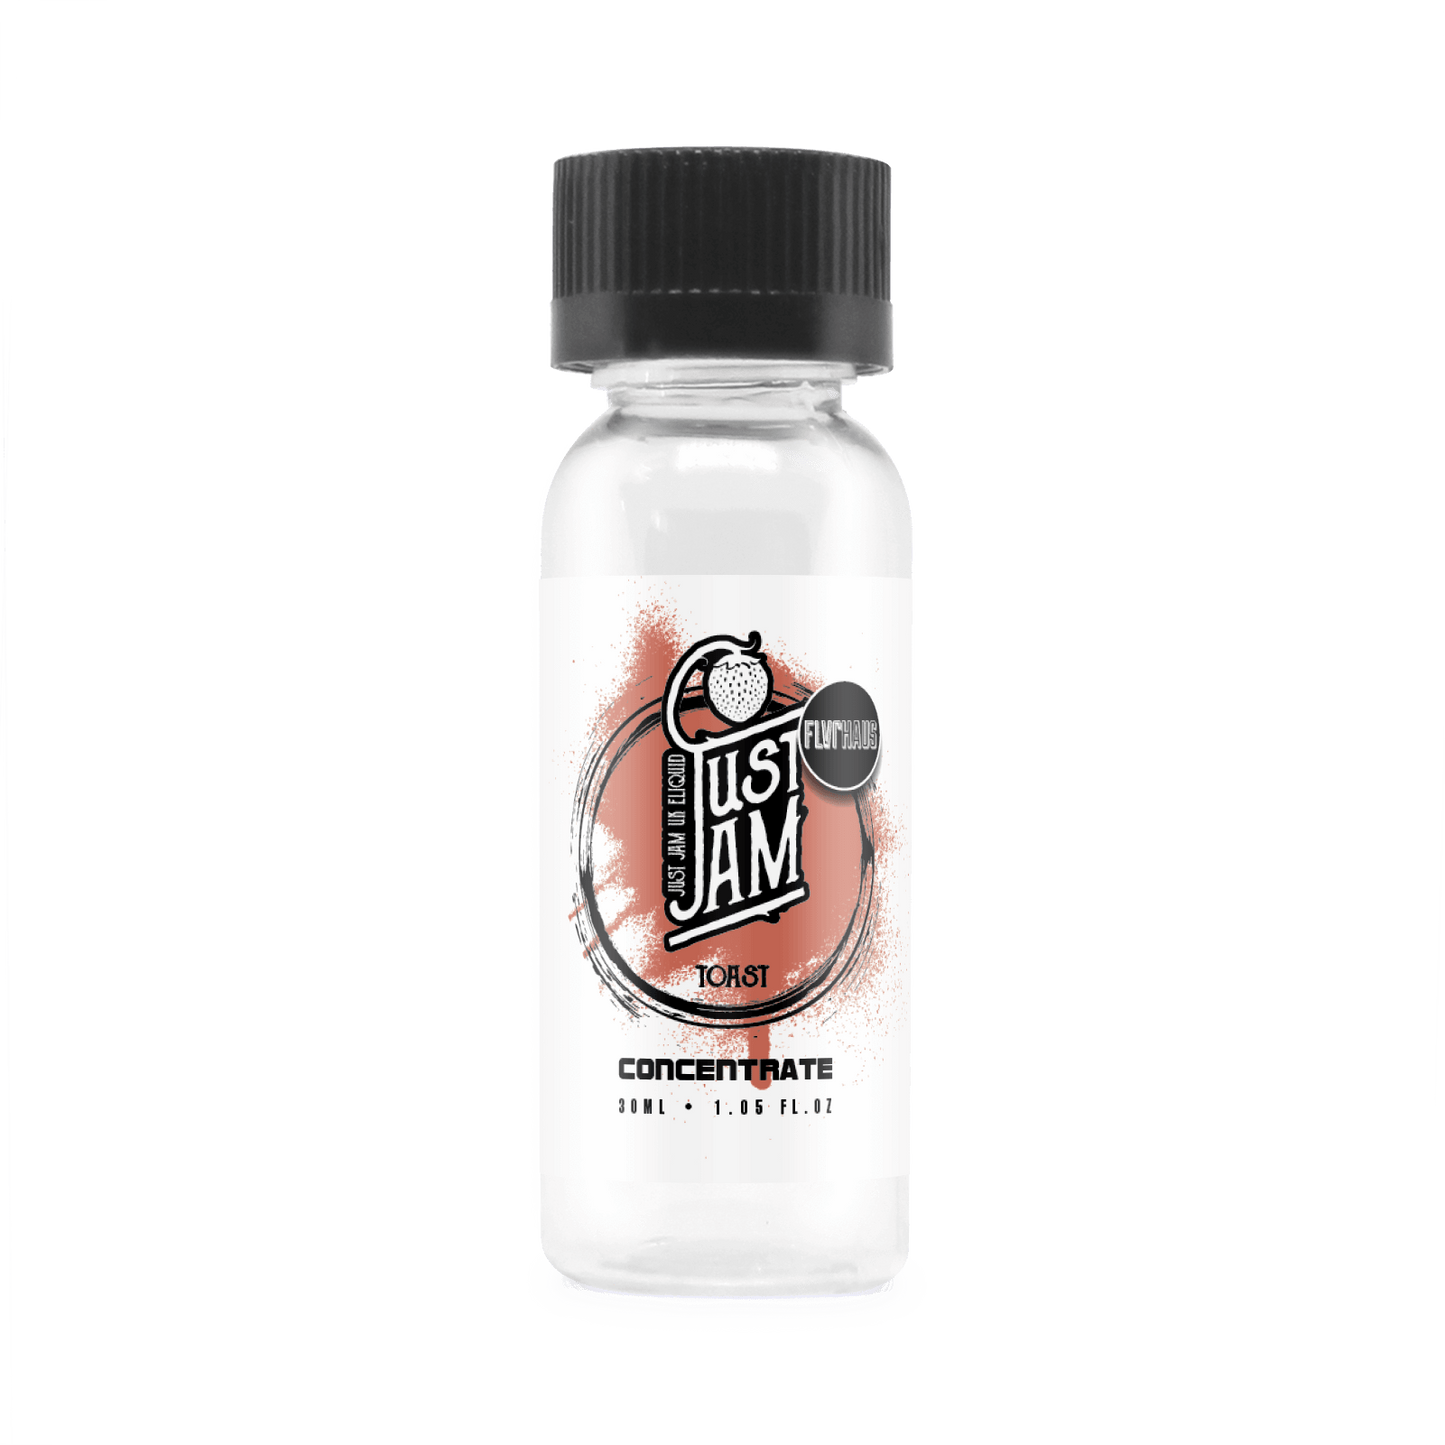 Just Jam - Strawberry Toast Concentrate 30ml - The Ace Of Vapez